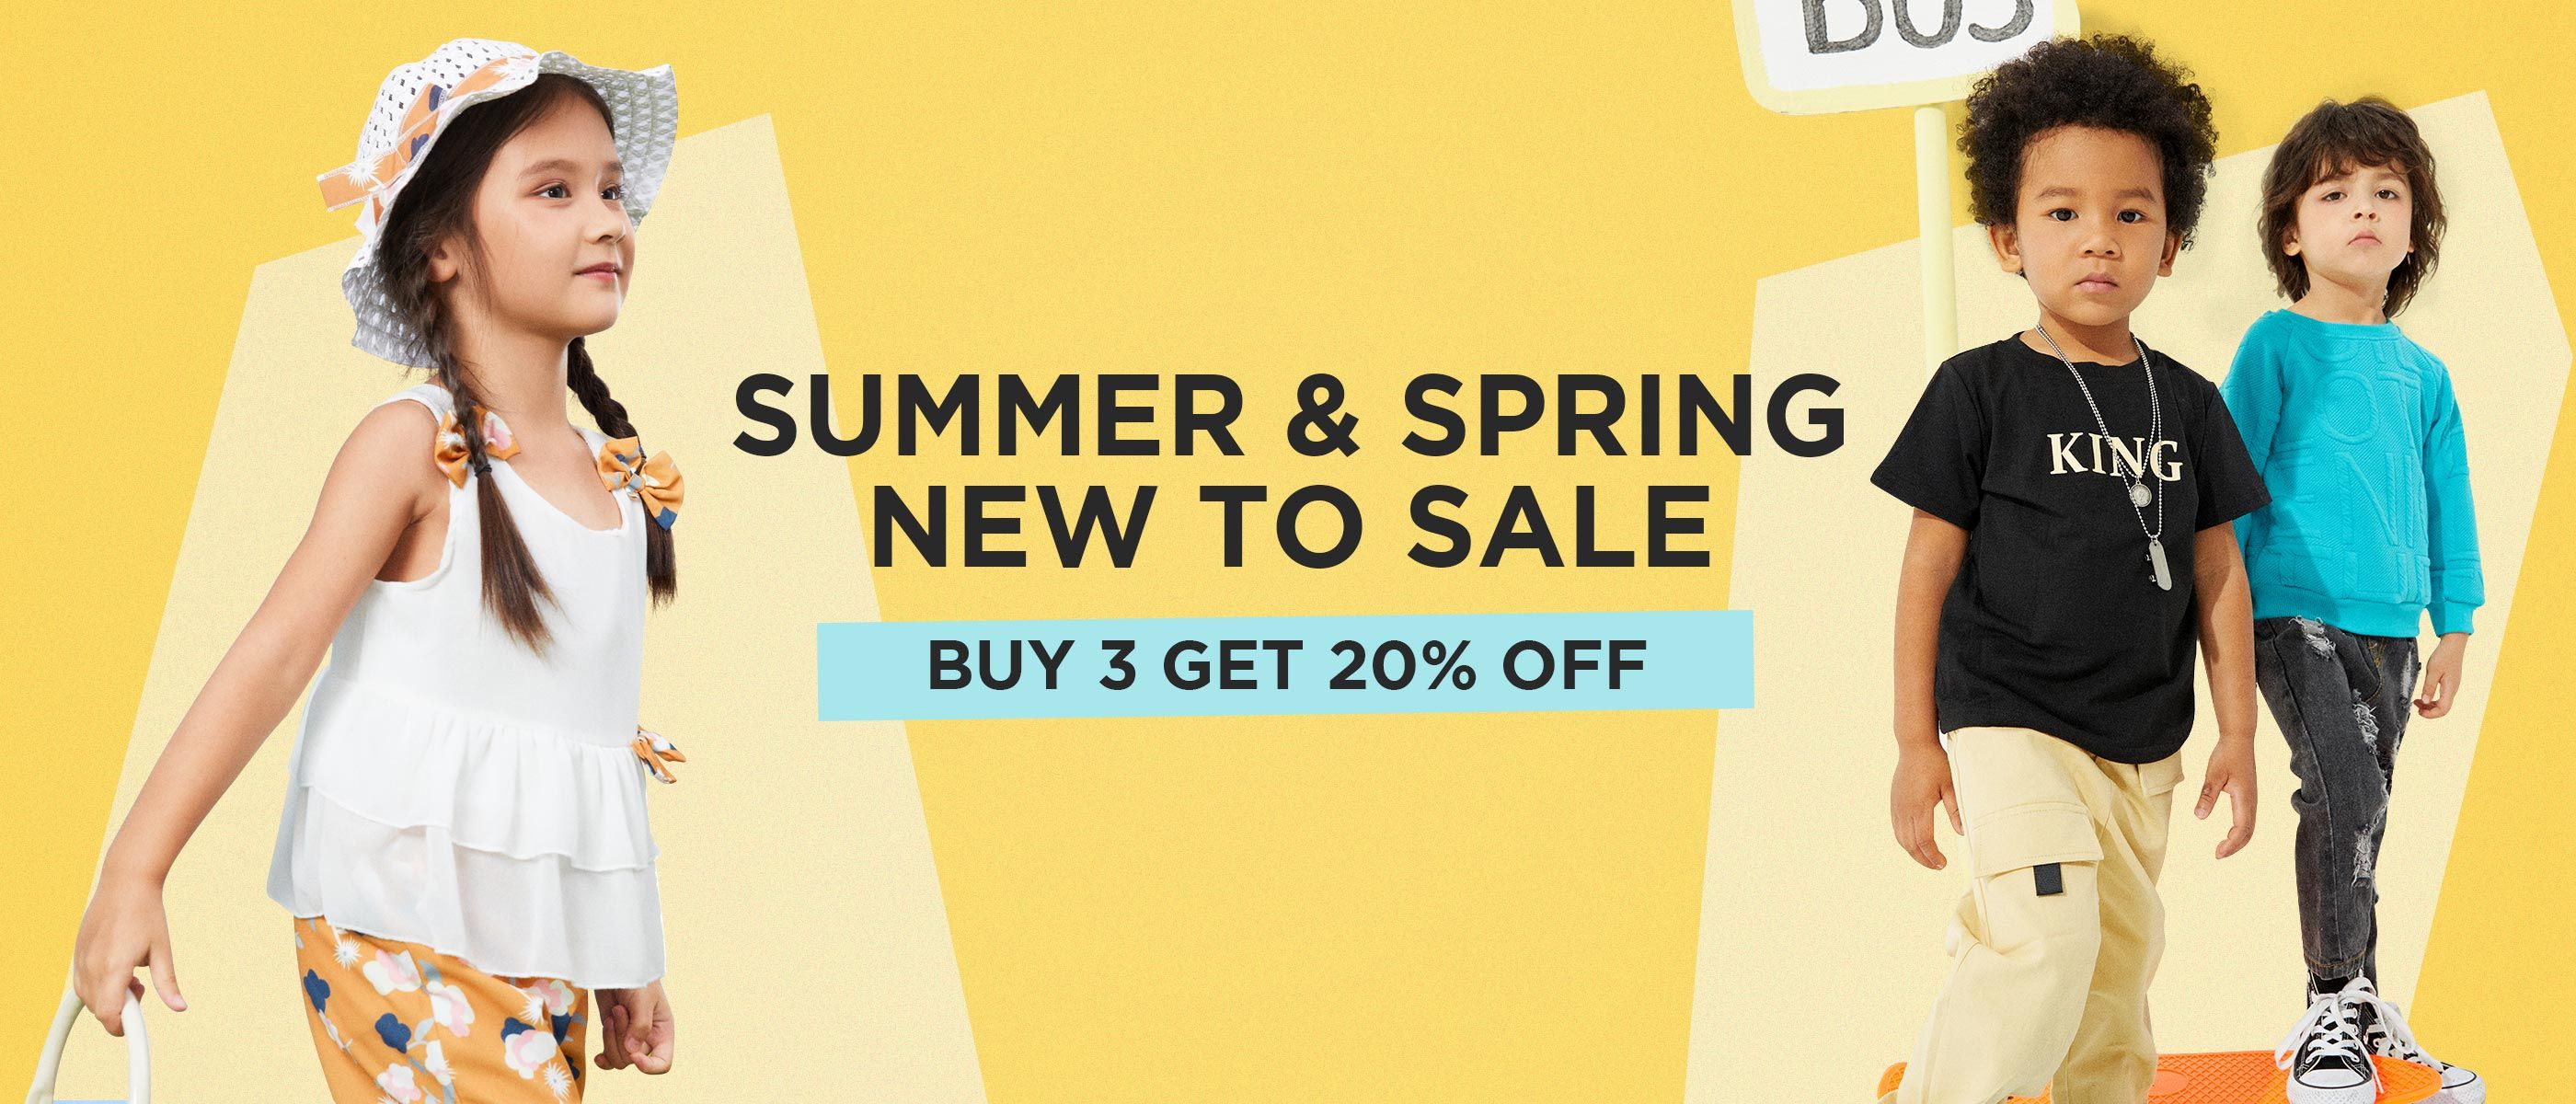 Summer & Spring New to Sale